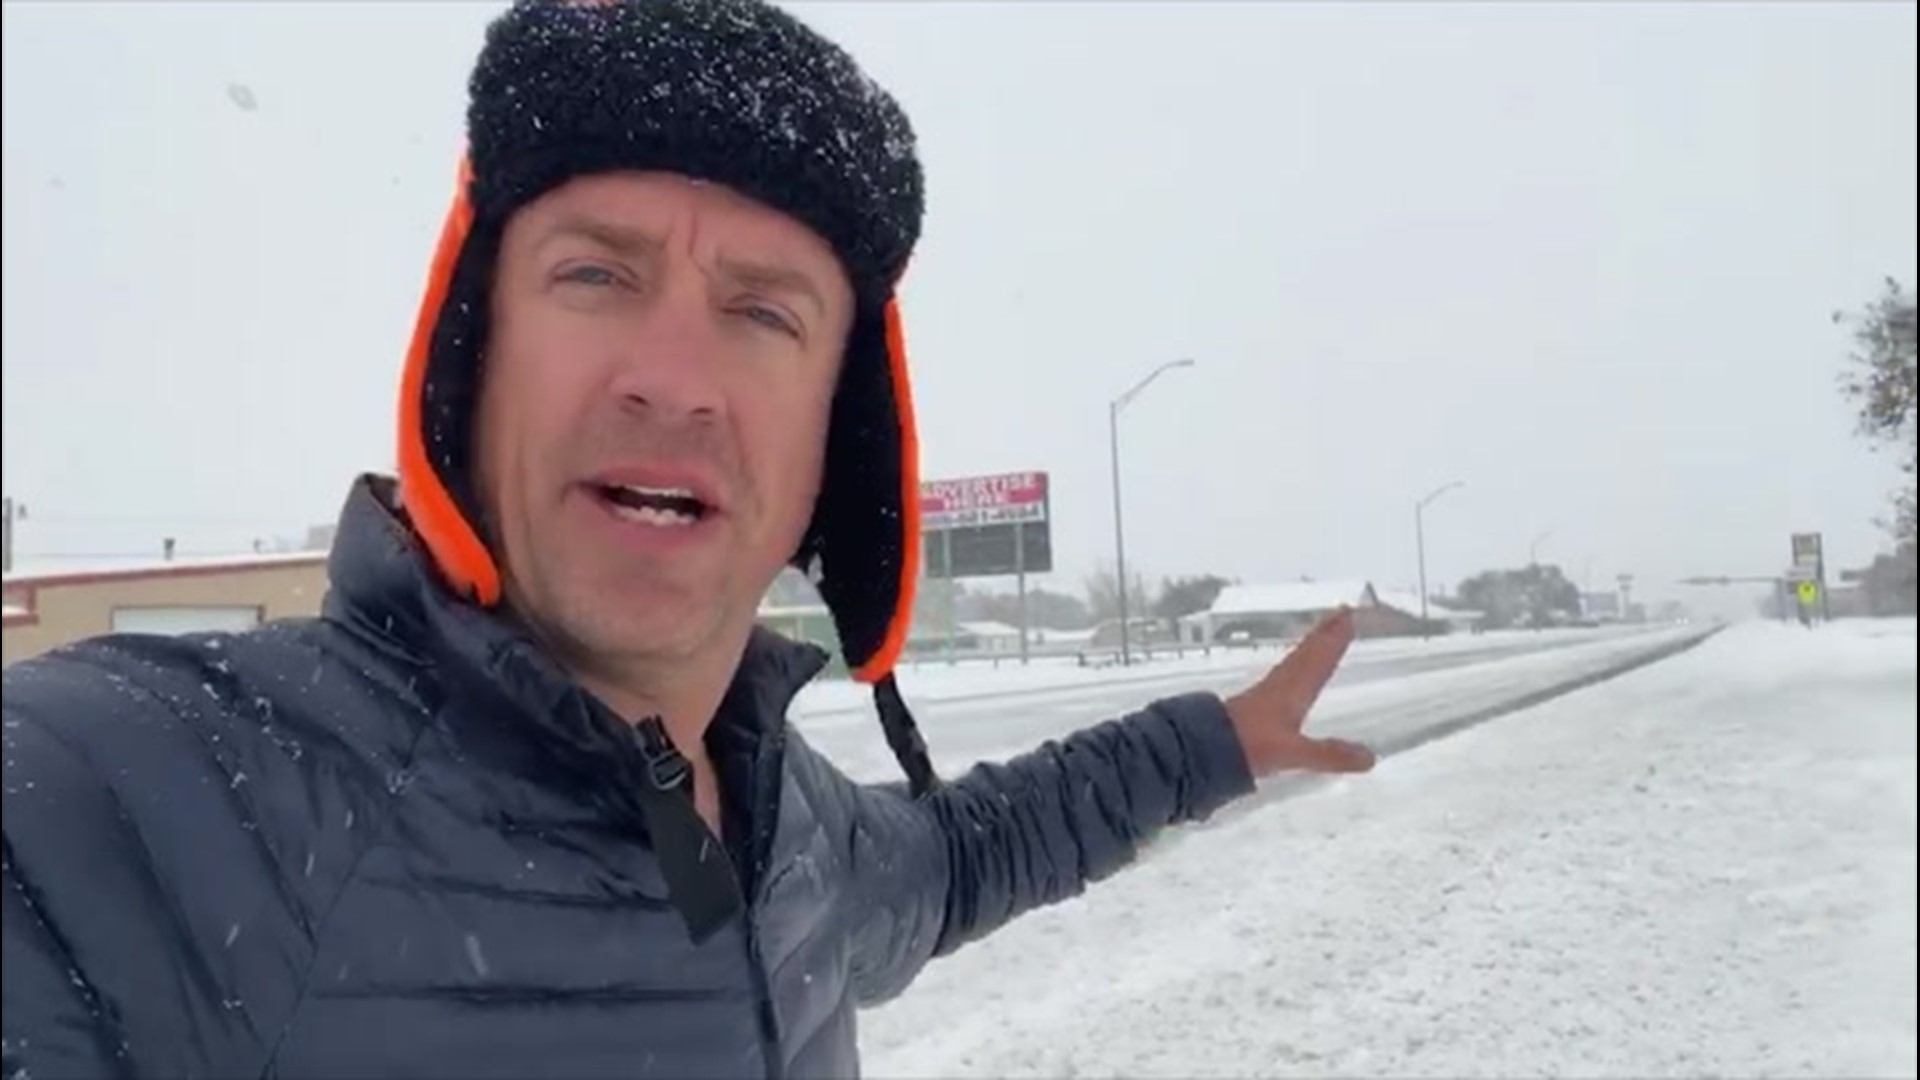 Extreme Meteorologist Reed Timmer reports from Texline, Texas, where 8 to 10 inches of snow fell in the overnight hours of Oct. 27.